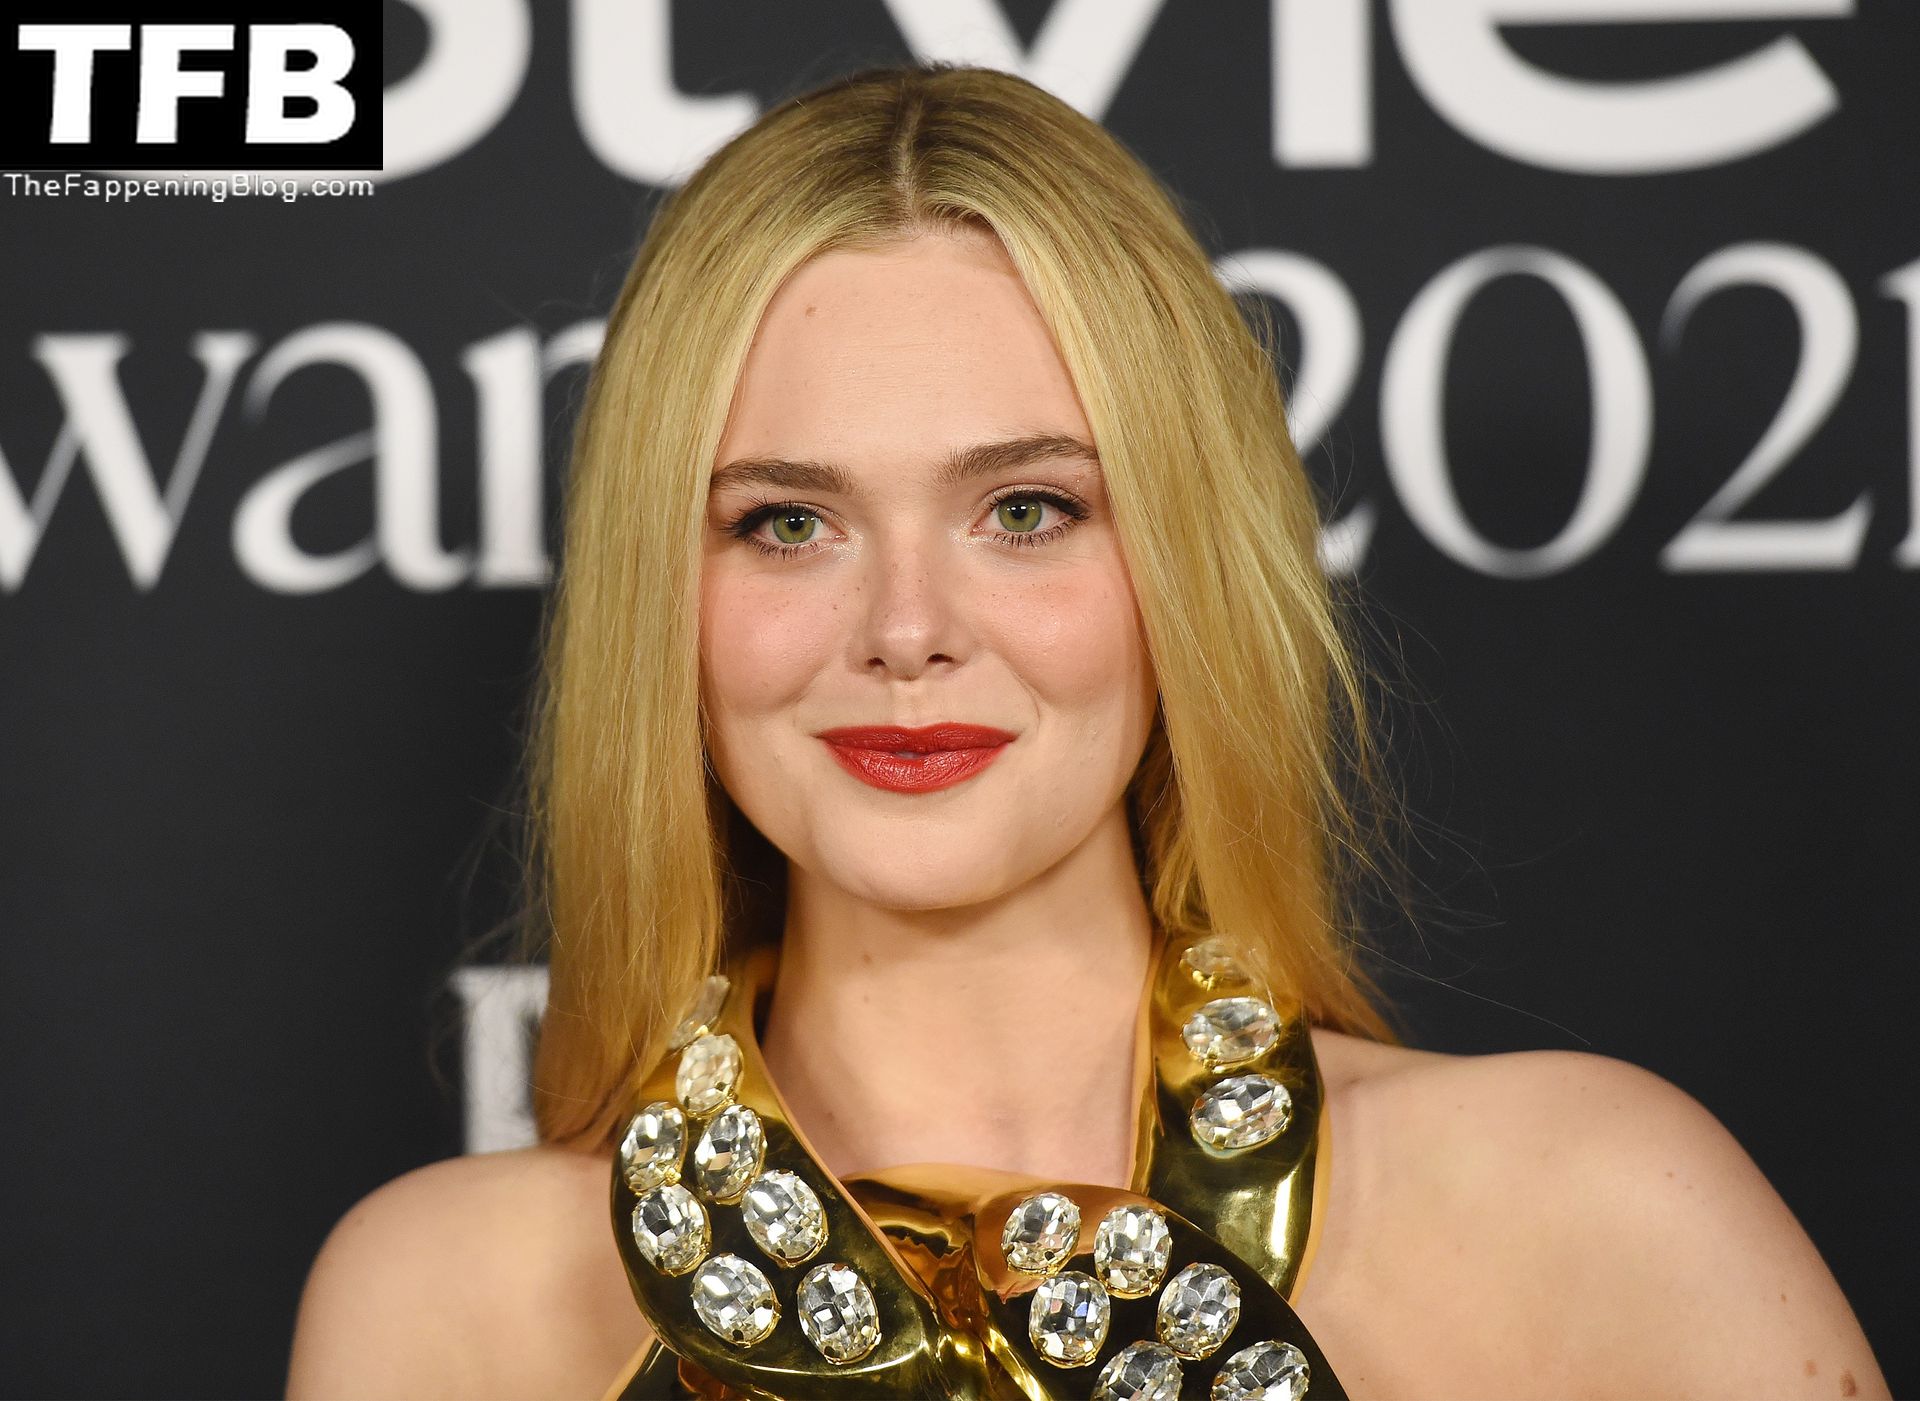 Elle-Fanning-Sexy-Braless-The-Fappening-Blog-73.jpg